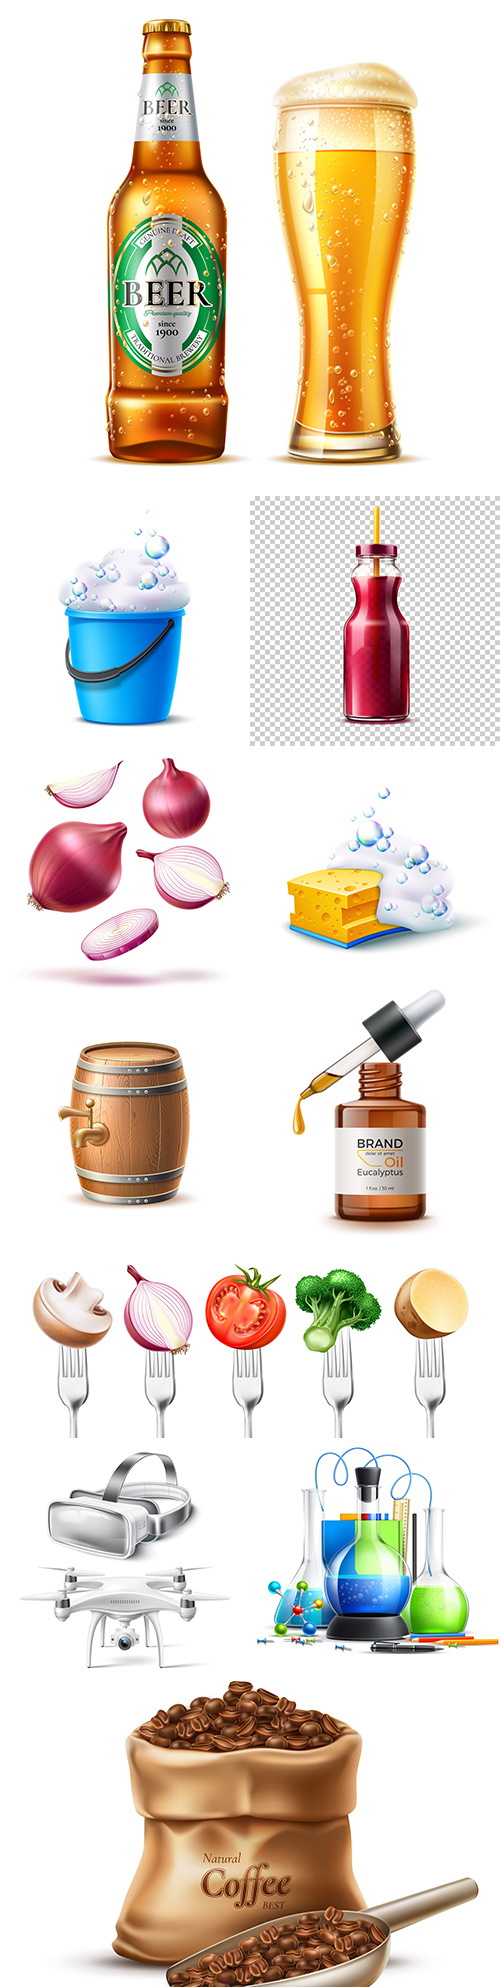 Realistic 3d illustrations of different objects and productsxA;